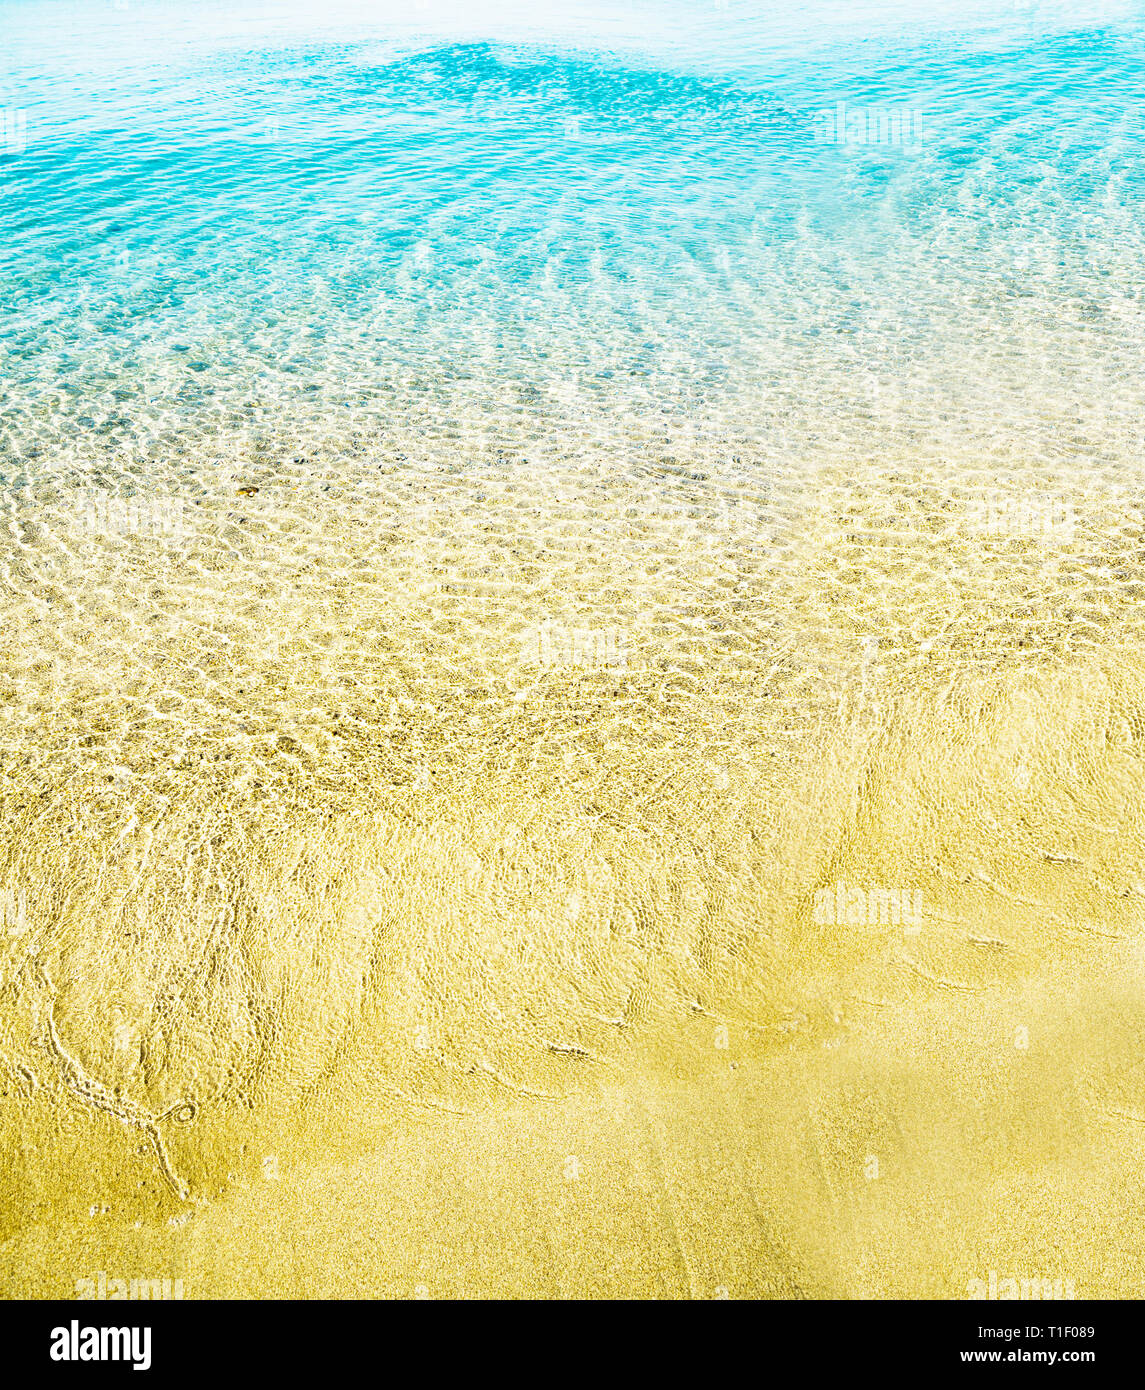 Top View Of Sea Water And Sand Texture Image Aerial Beach Ocean Background Post Bright And Pastel Light Instagram Photo Filter Stock Photo Alamy